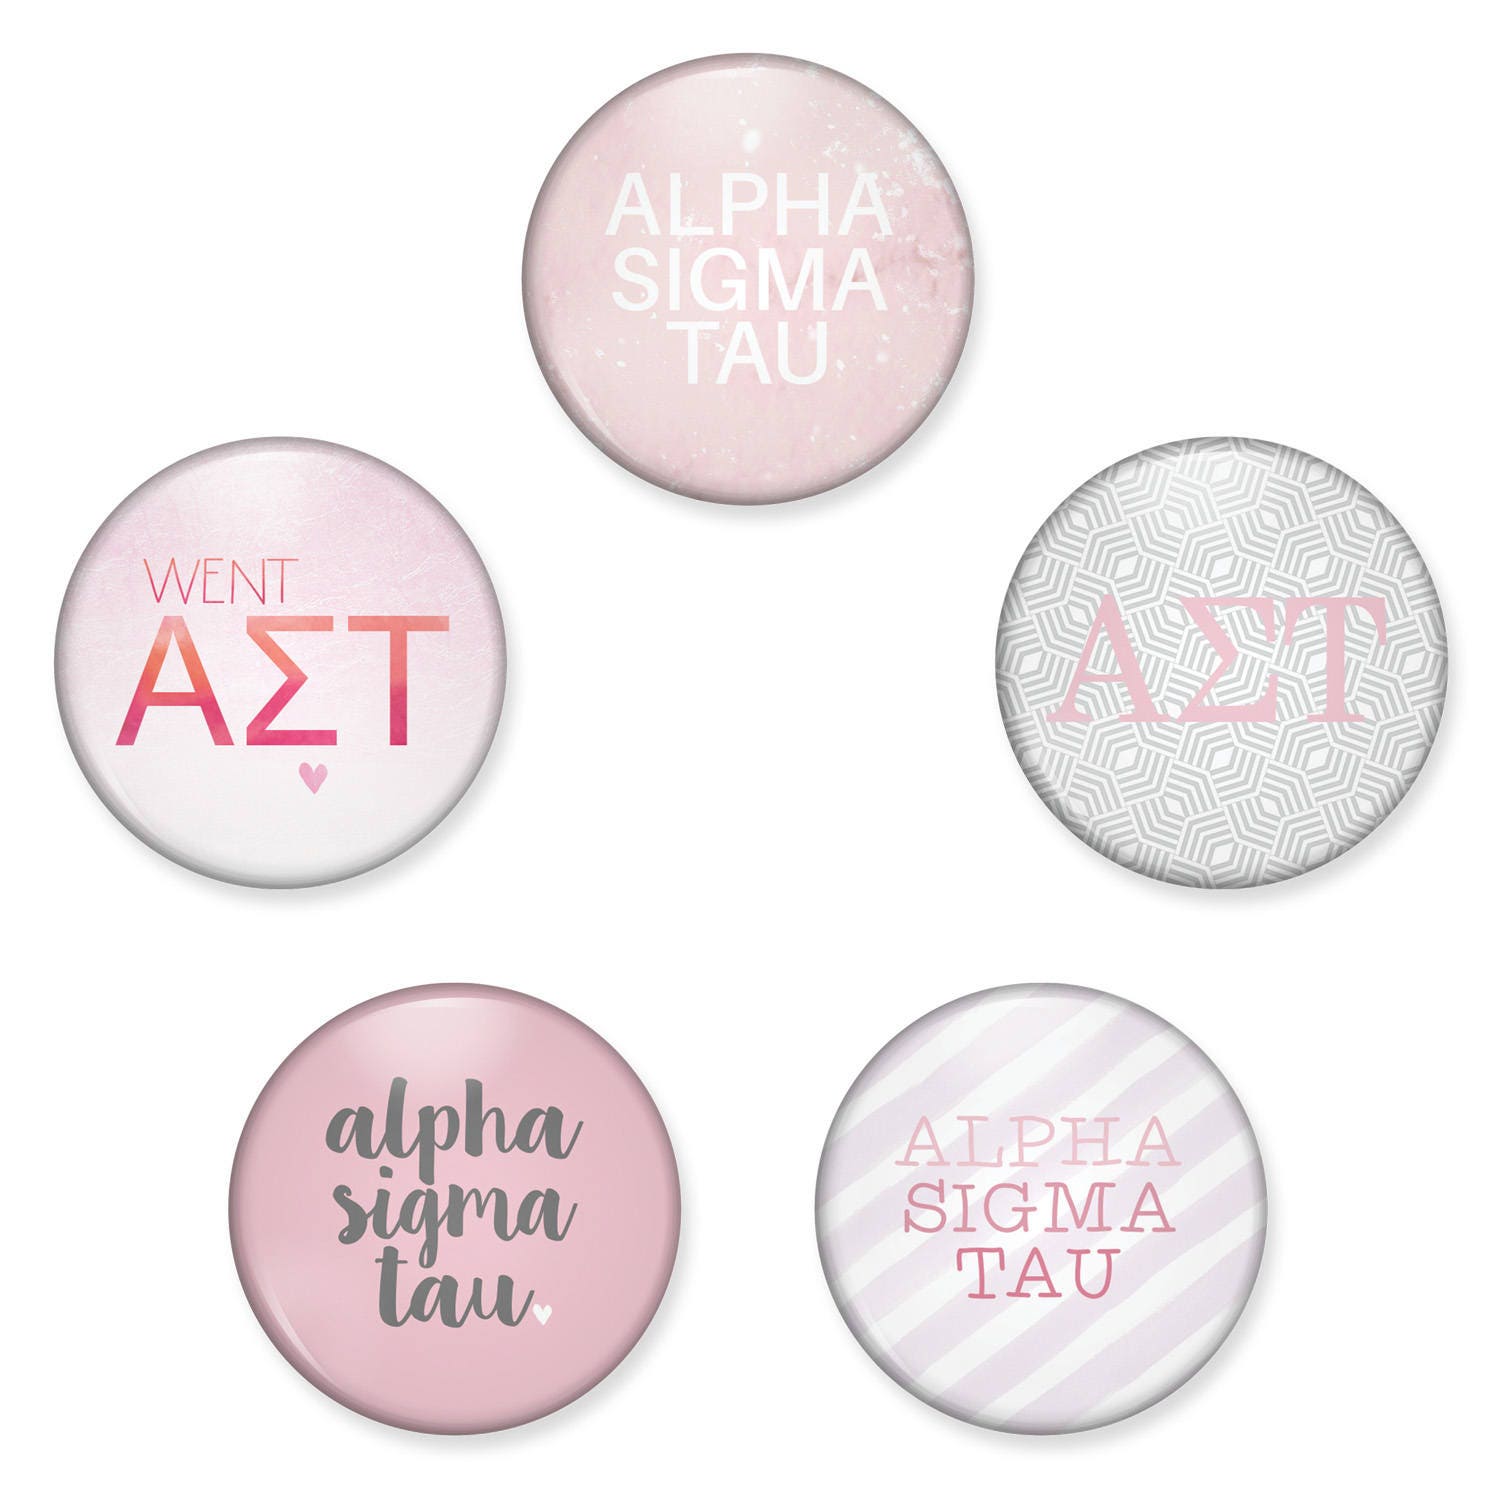 Alpha Sigma Tau Button Set, Pin Back Buttons, Ast Sorority Pack, Magnet Magnets, Bid Day Gifts